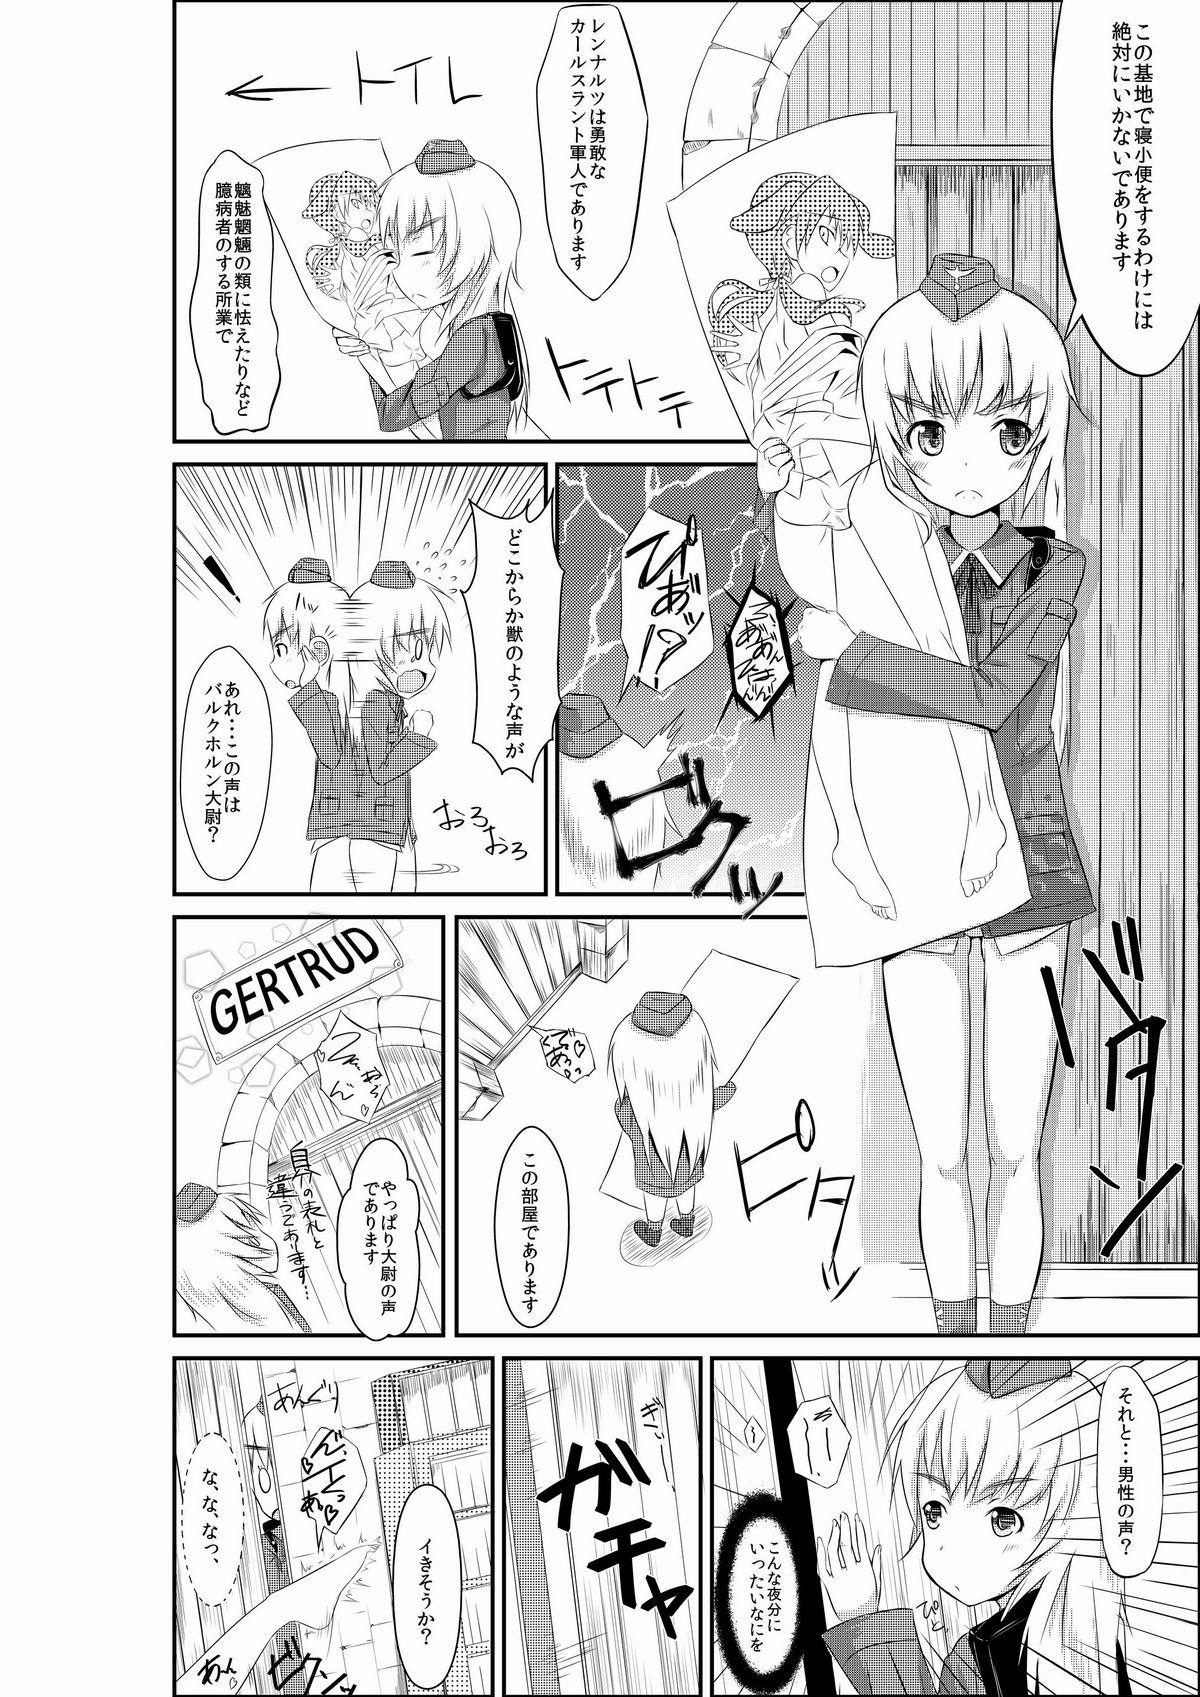 Gaping 練習 お姉ちゃんとヘルマちゃん - Strike witches Juggs - Page 2